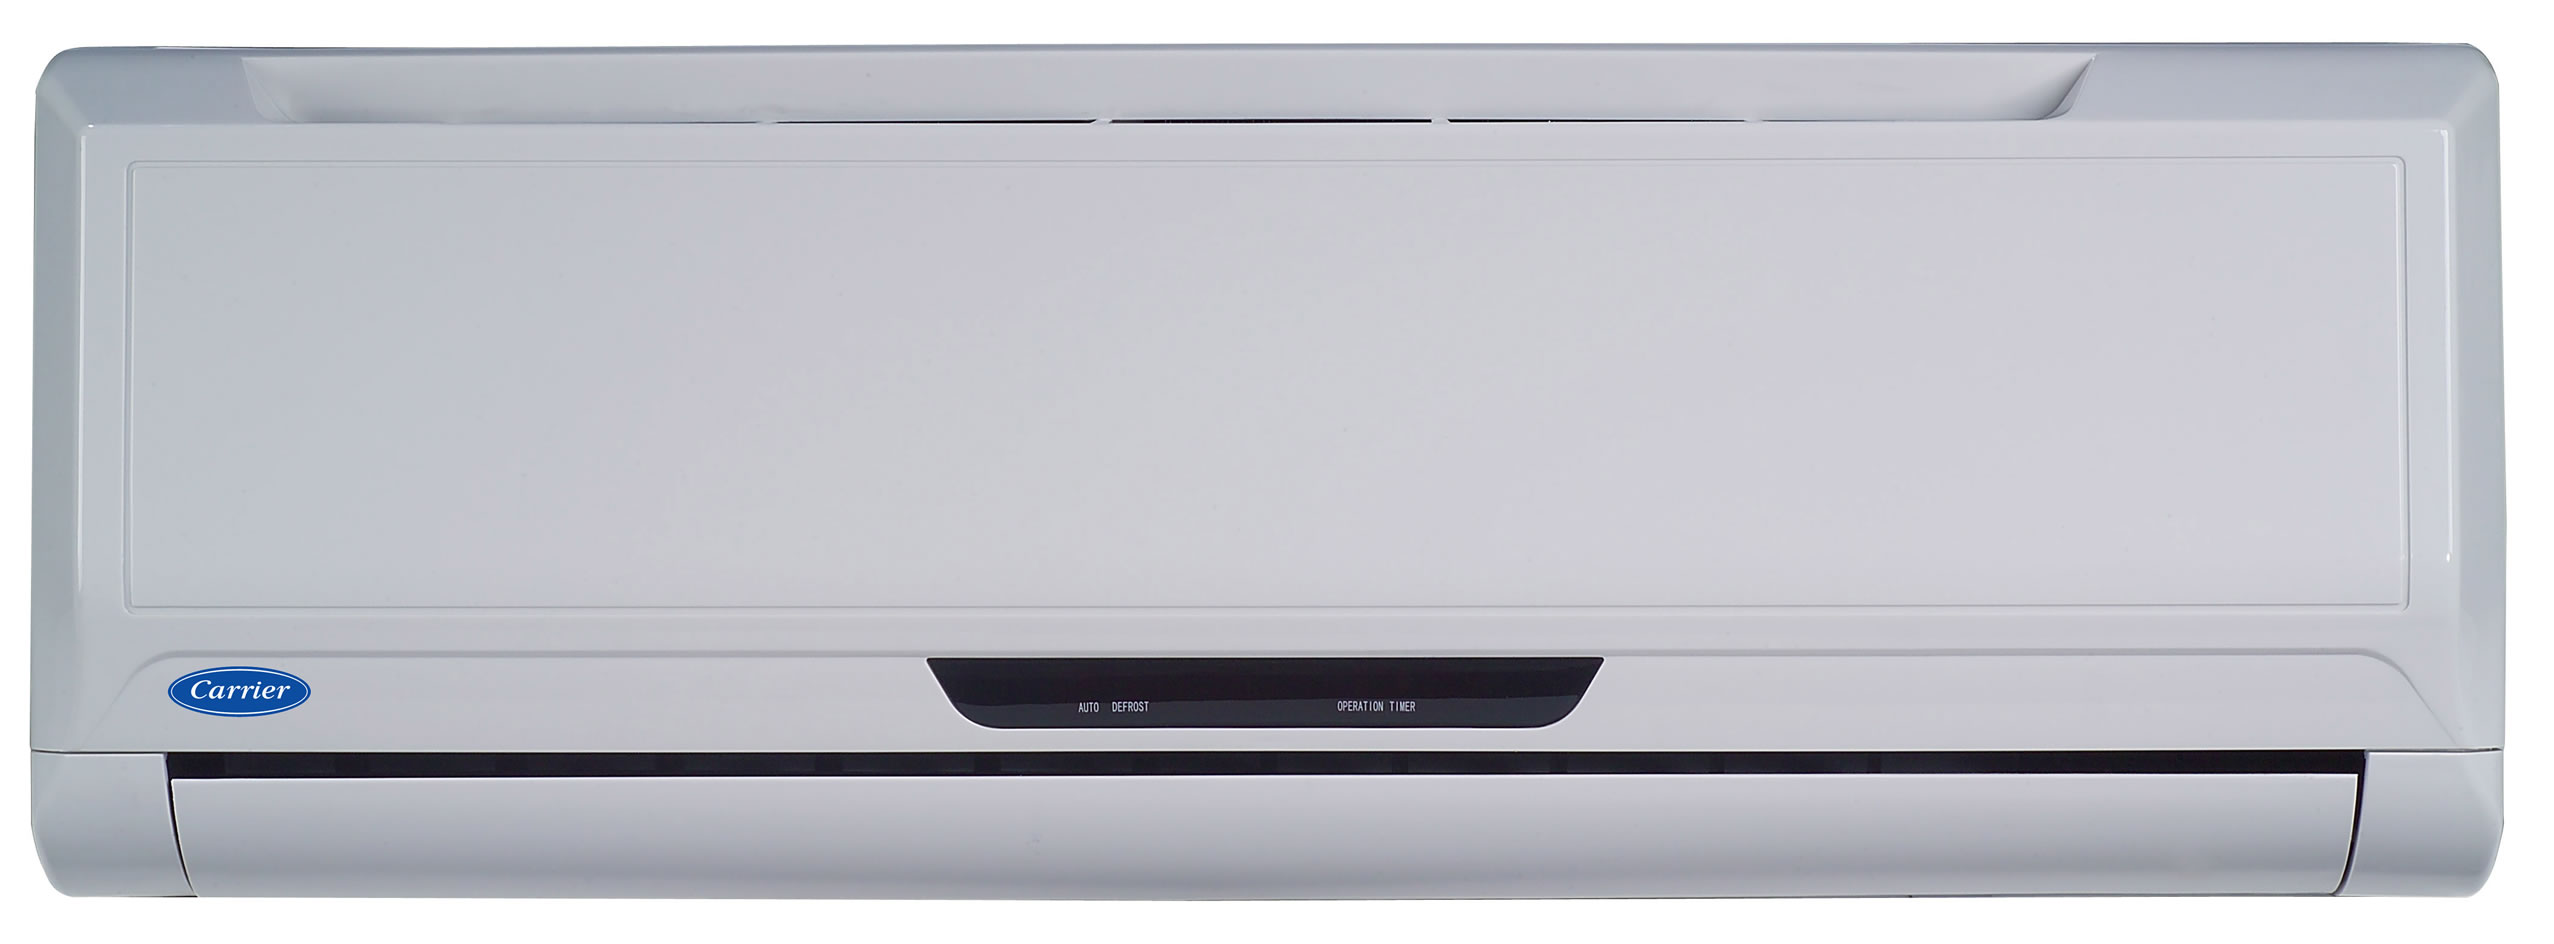 Where can you find prices for Carrier air conditioners?